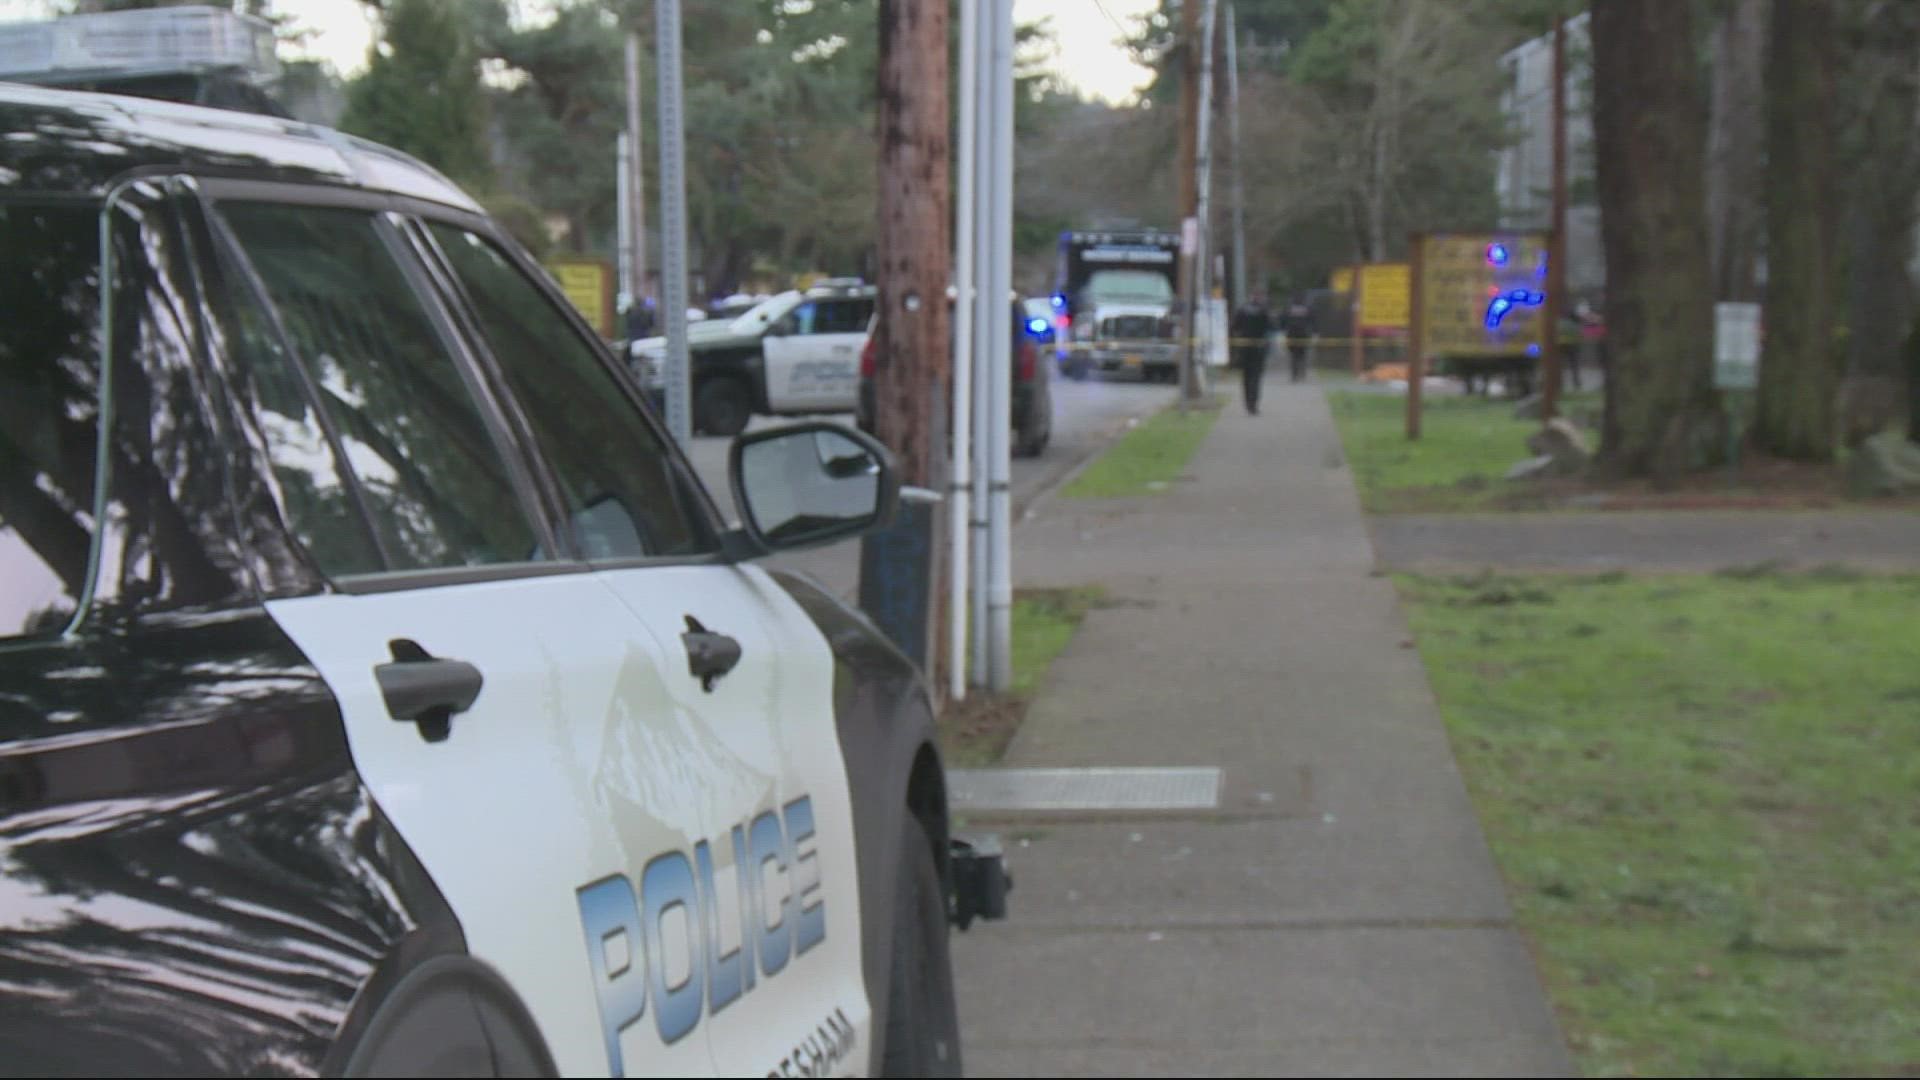 One person died in a shooting outside a apartment complex in the Rockwood neighborhood on New Year's Day, Gresham police said.